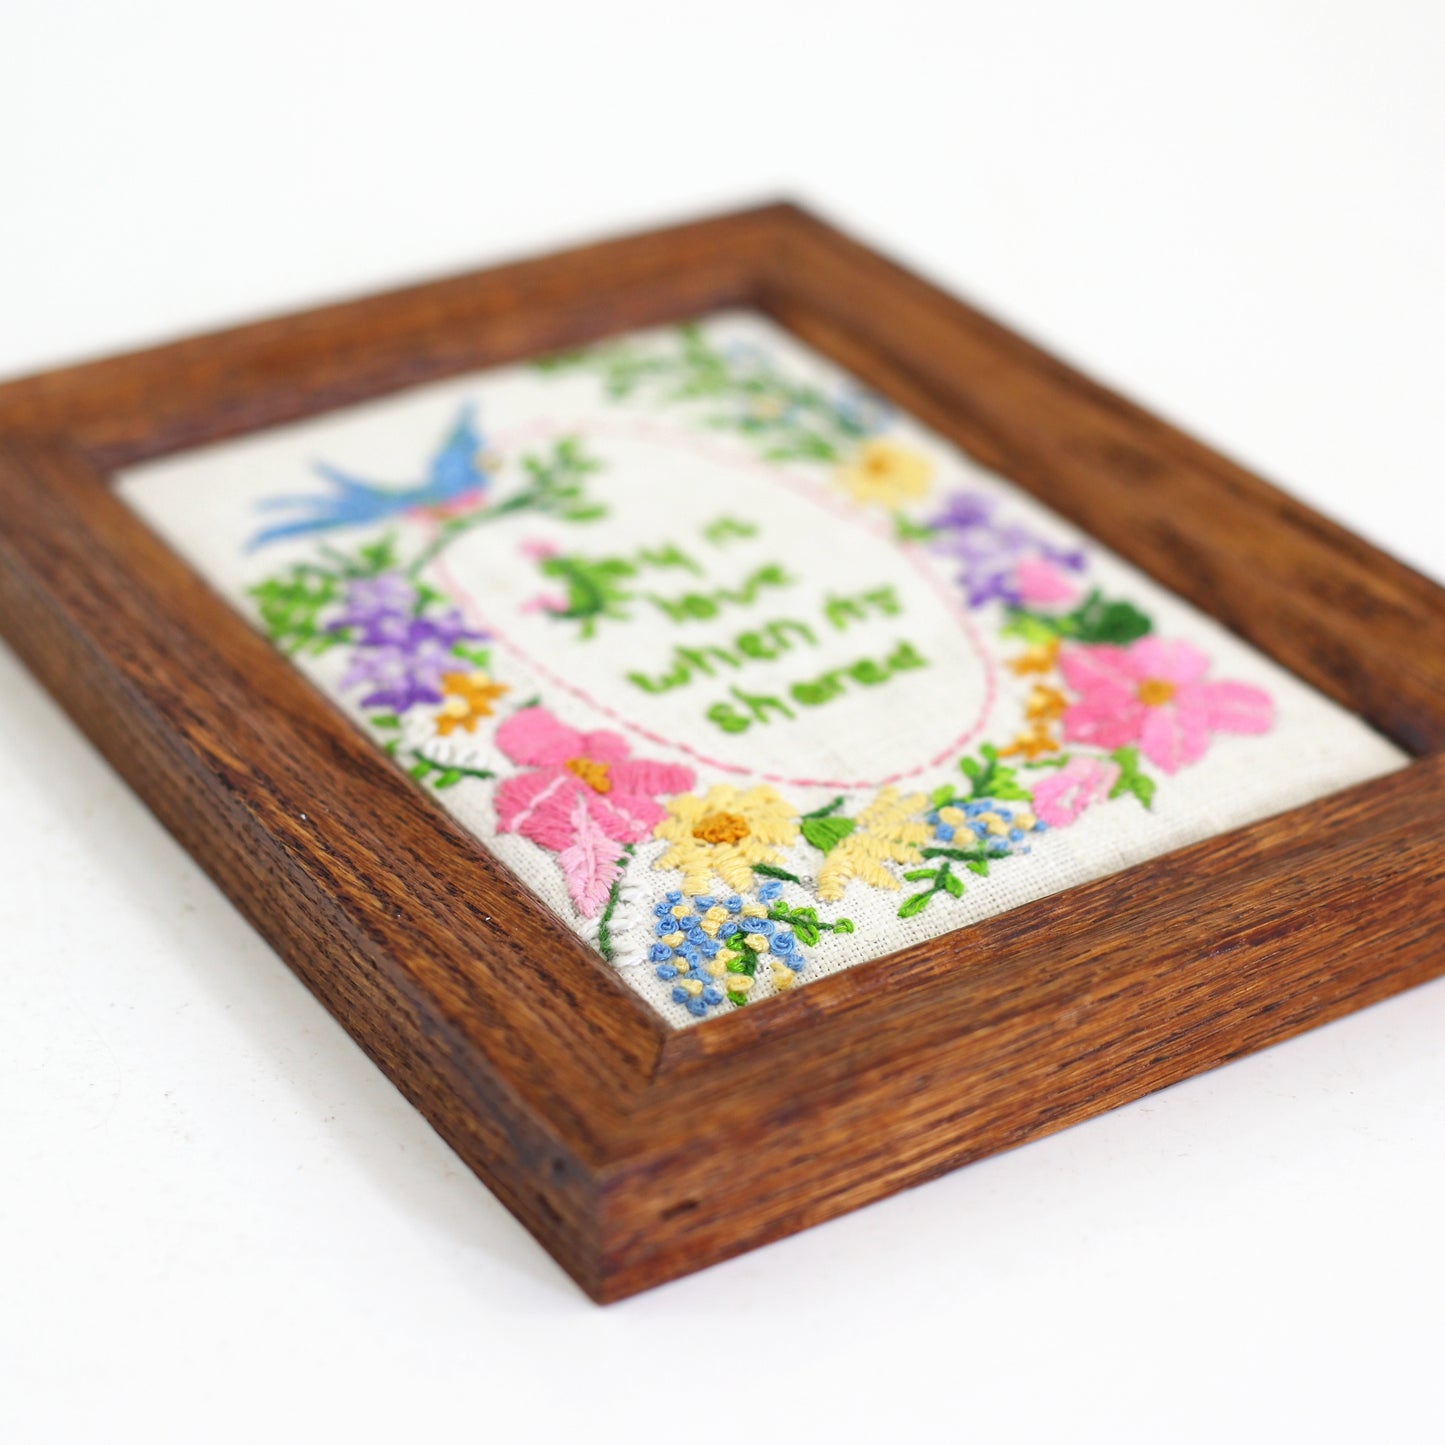 SOLD - Vintage Framed Needlepoint - Joy is Love When It's Shared